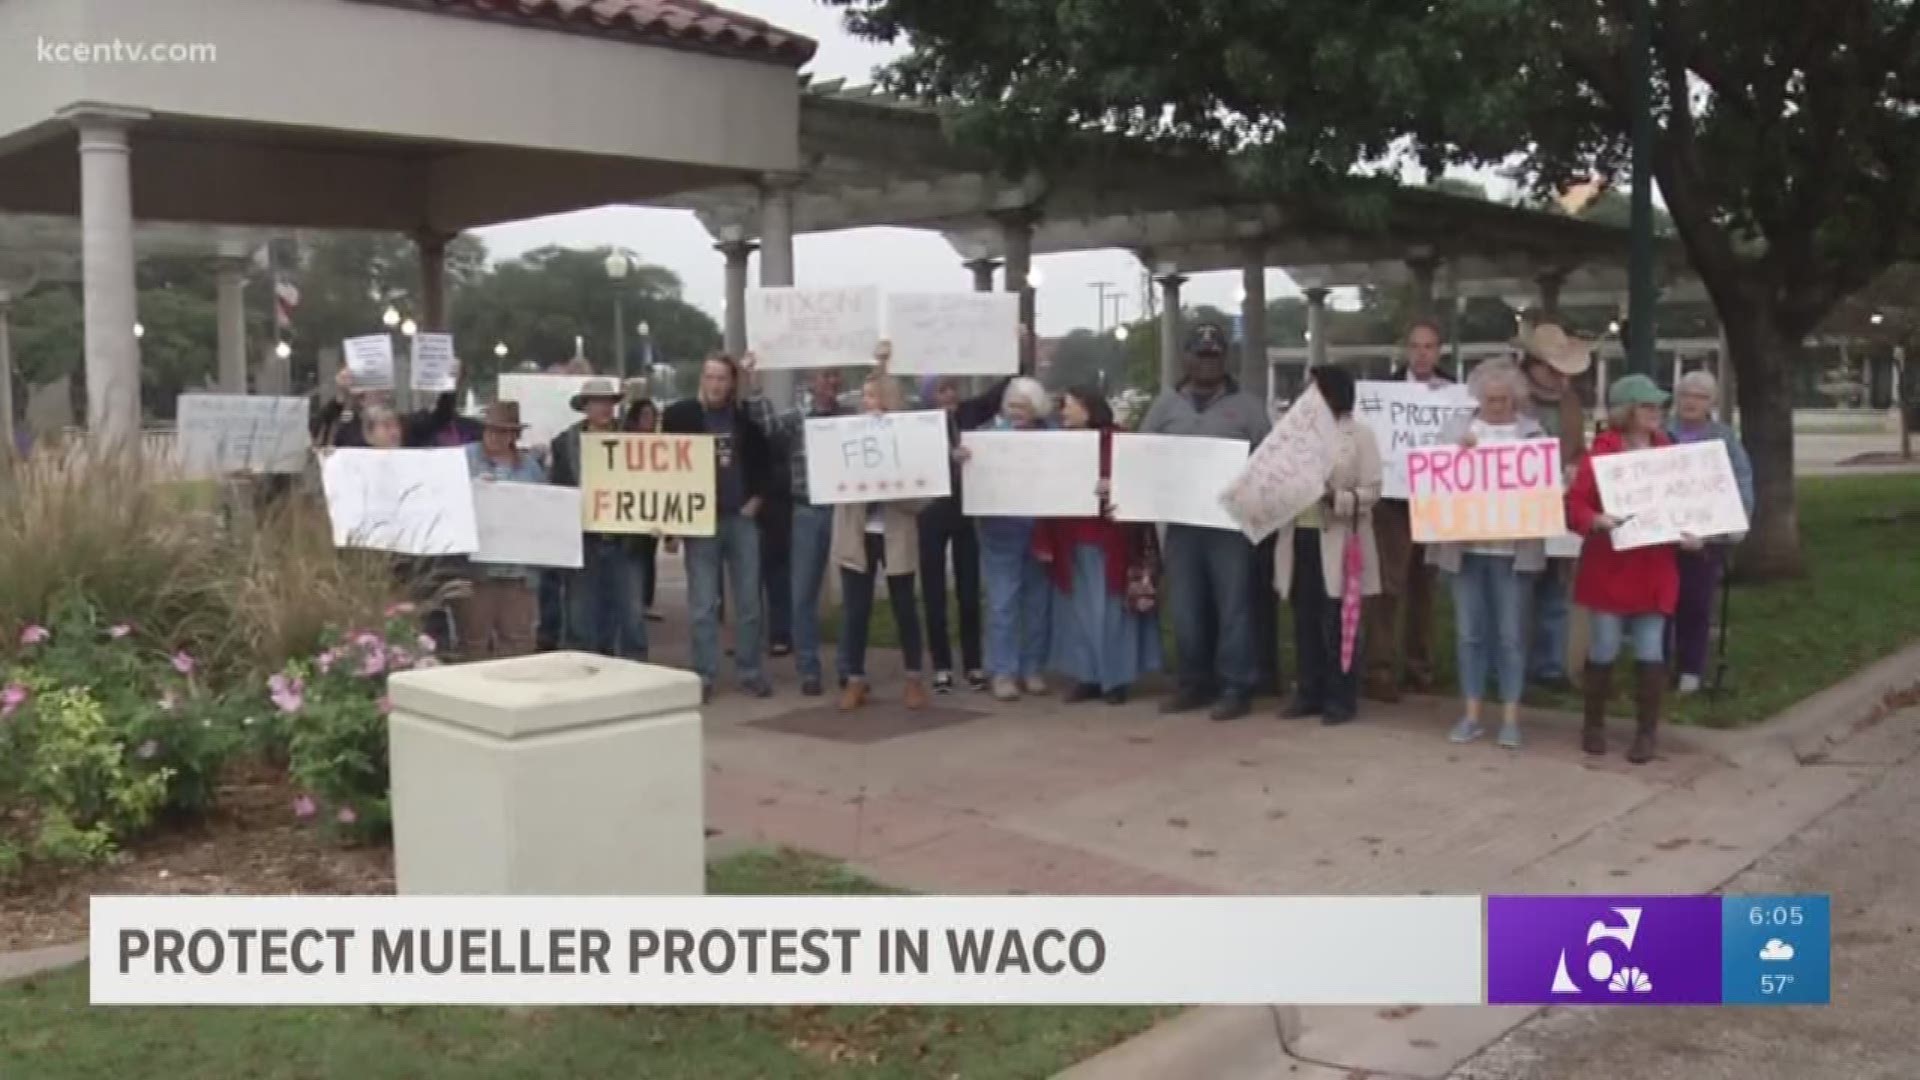 'Protect Mueller' protest held in Waco